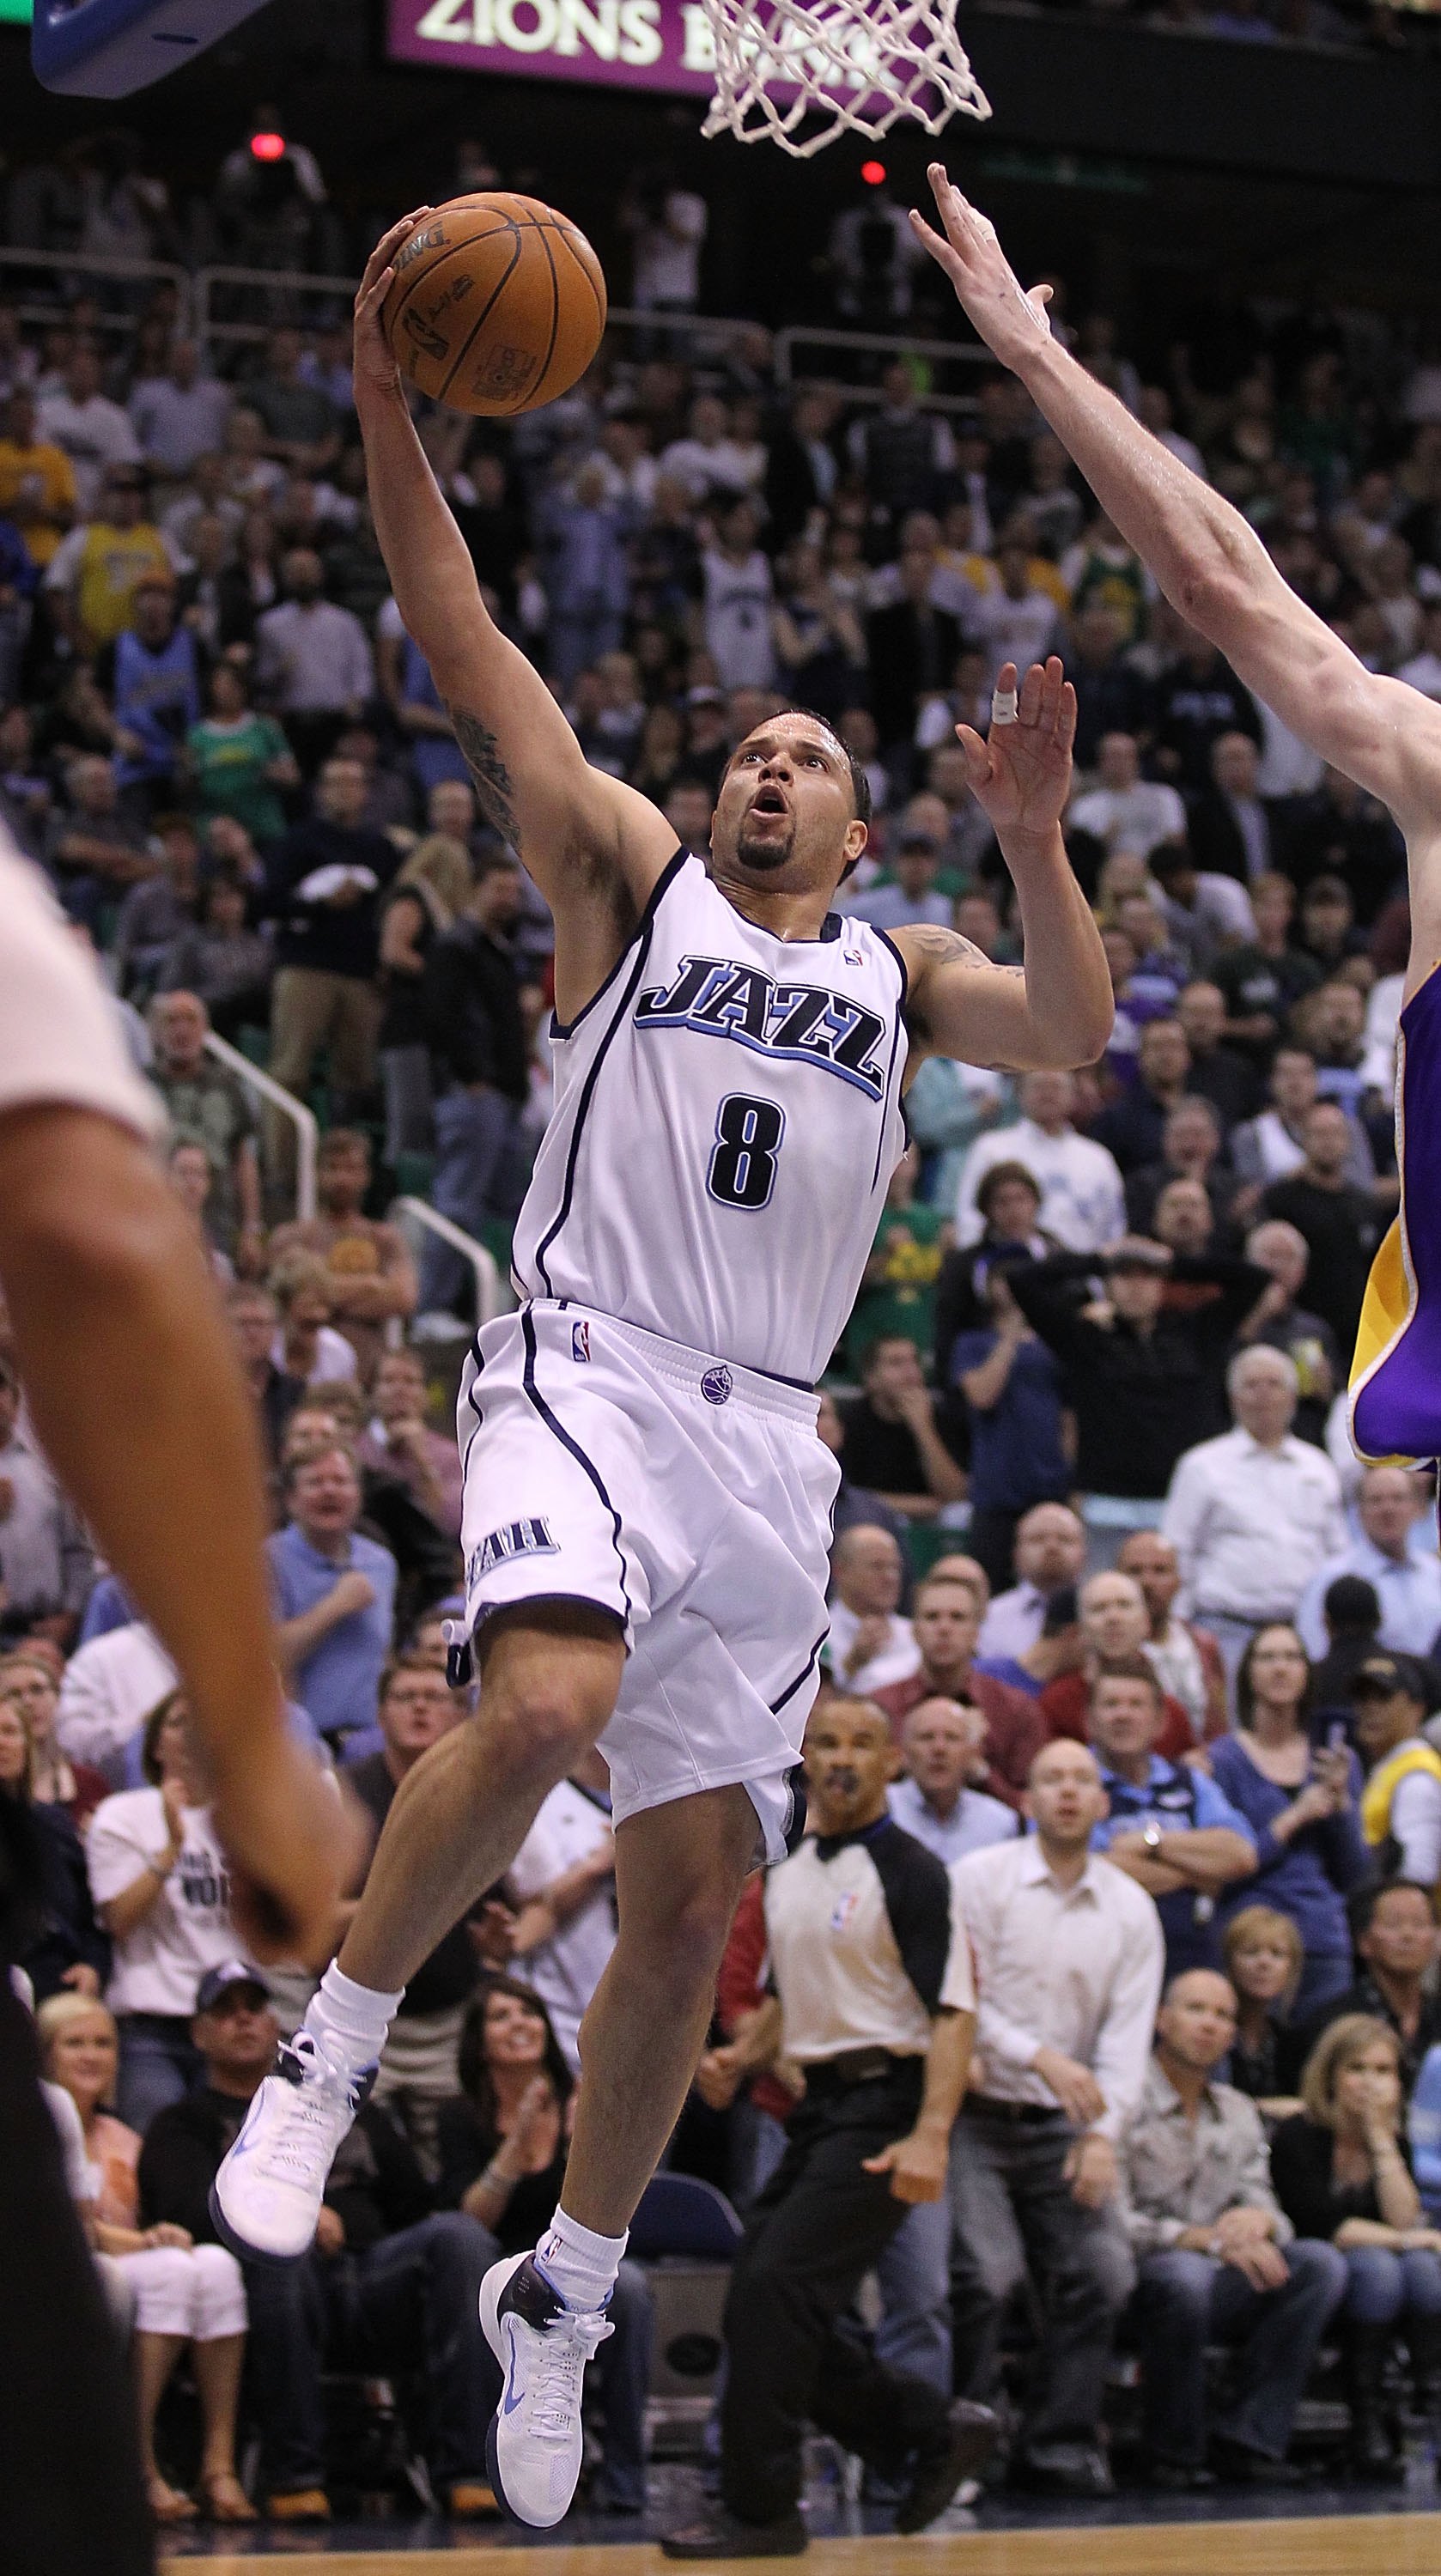 SALT LAKE CITY - MAY 10:  Deron Williams #8 of the Utah Jazz in action against the Los Angeles Lakers during Game Four of the Western Conference Semifinals of the 2010 NBA Playoffs on May 10, 2010 at Energy Solutions Arena in Salt Lake City, Utah. NOTE TO